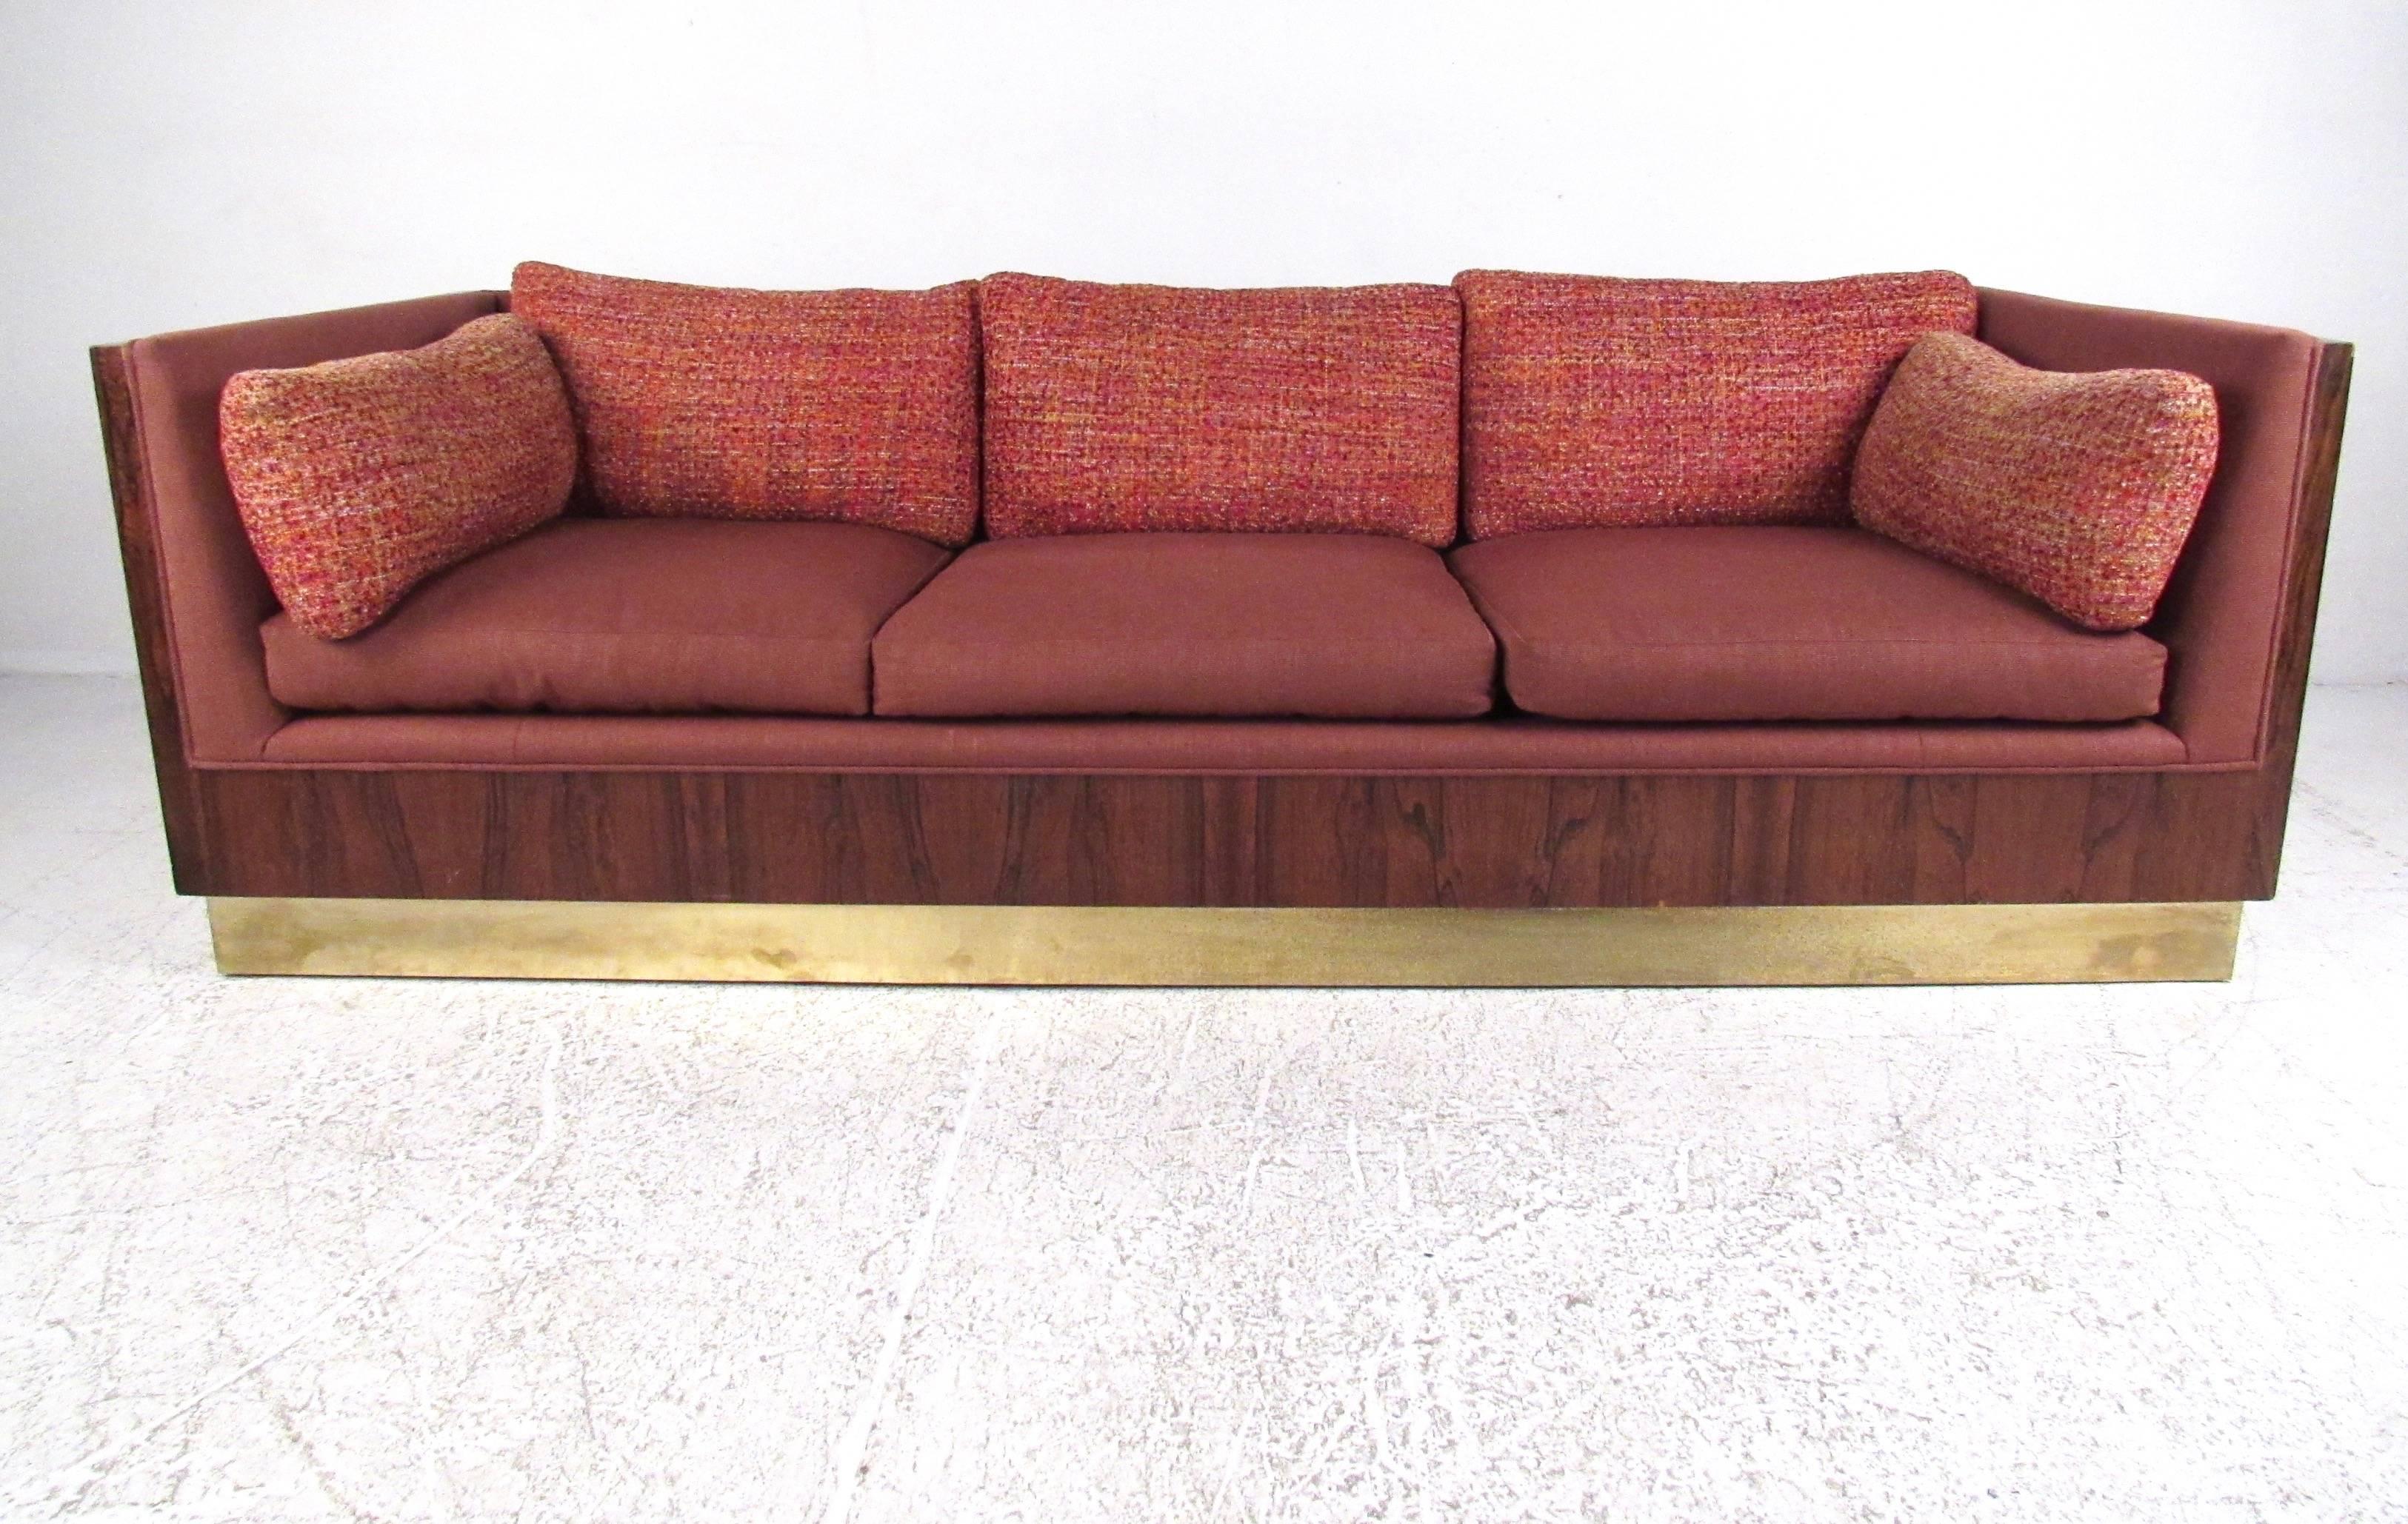 This stunning midcentury sofa by Milo Baughman features stylish vintage fabric, rich rosewood frame, and brass finish baseboard. Plush upholstered cushions feature unique two-tone covering, and makes an impressive statement in home or business